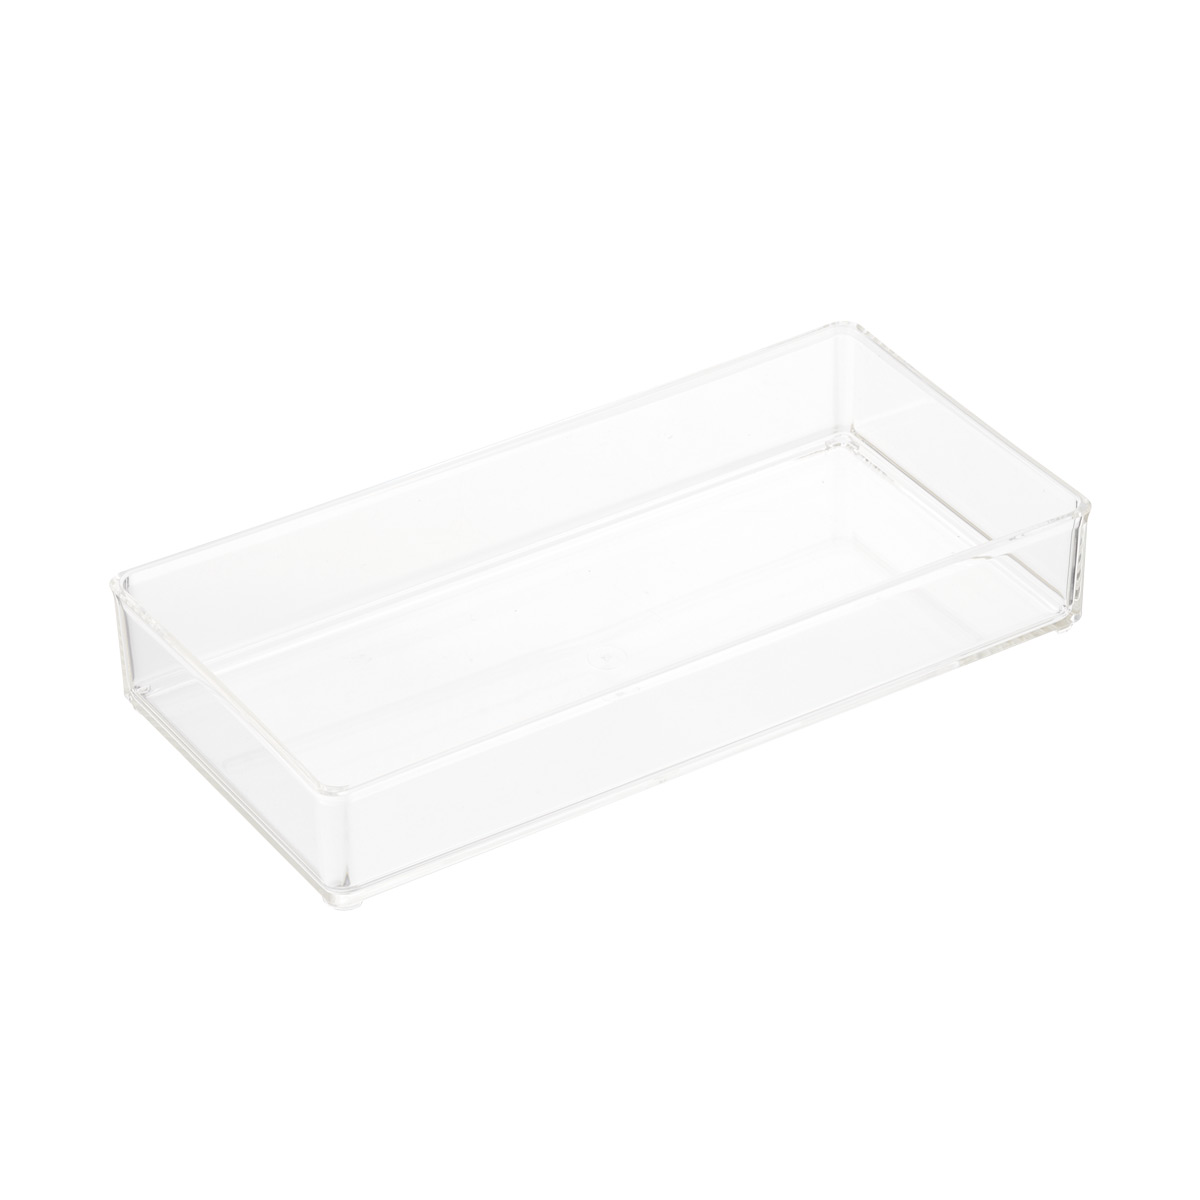 https://images.containerstore.com/catalogimages?sku=10074297